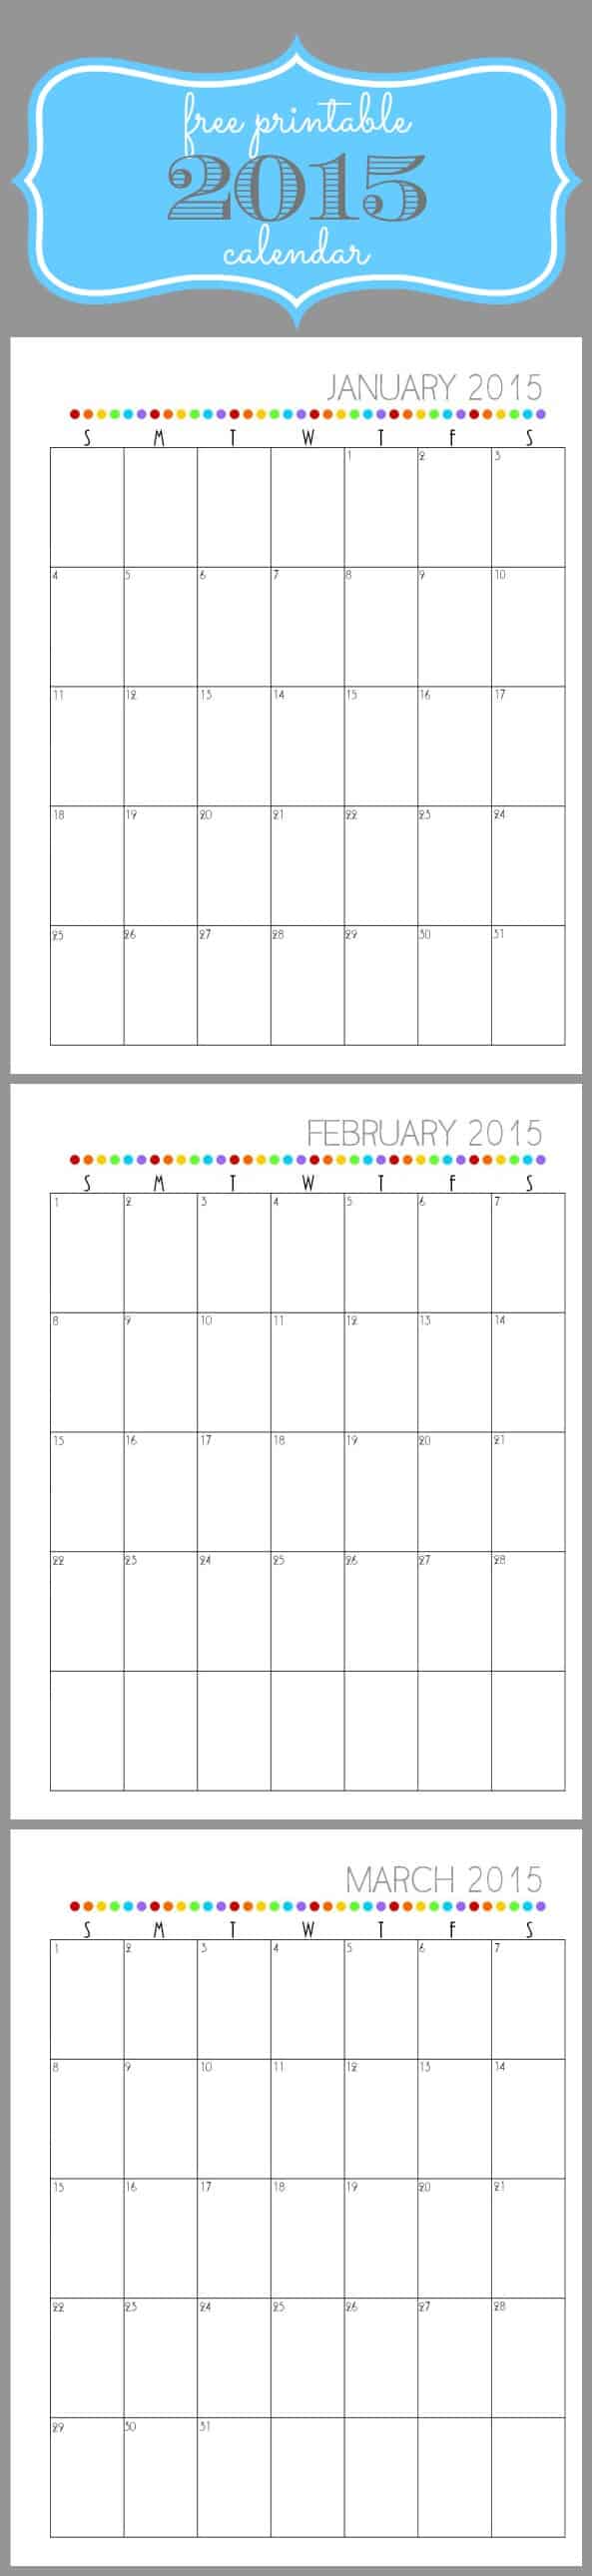 Get organized with this free Printable 2015 Calendar!